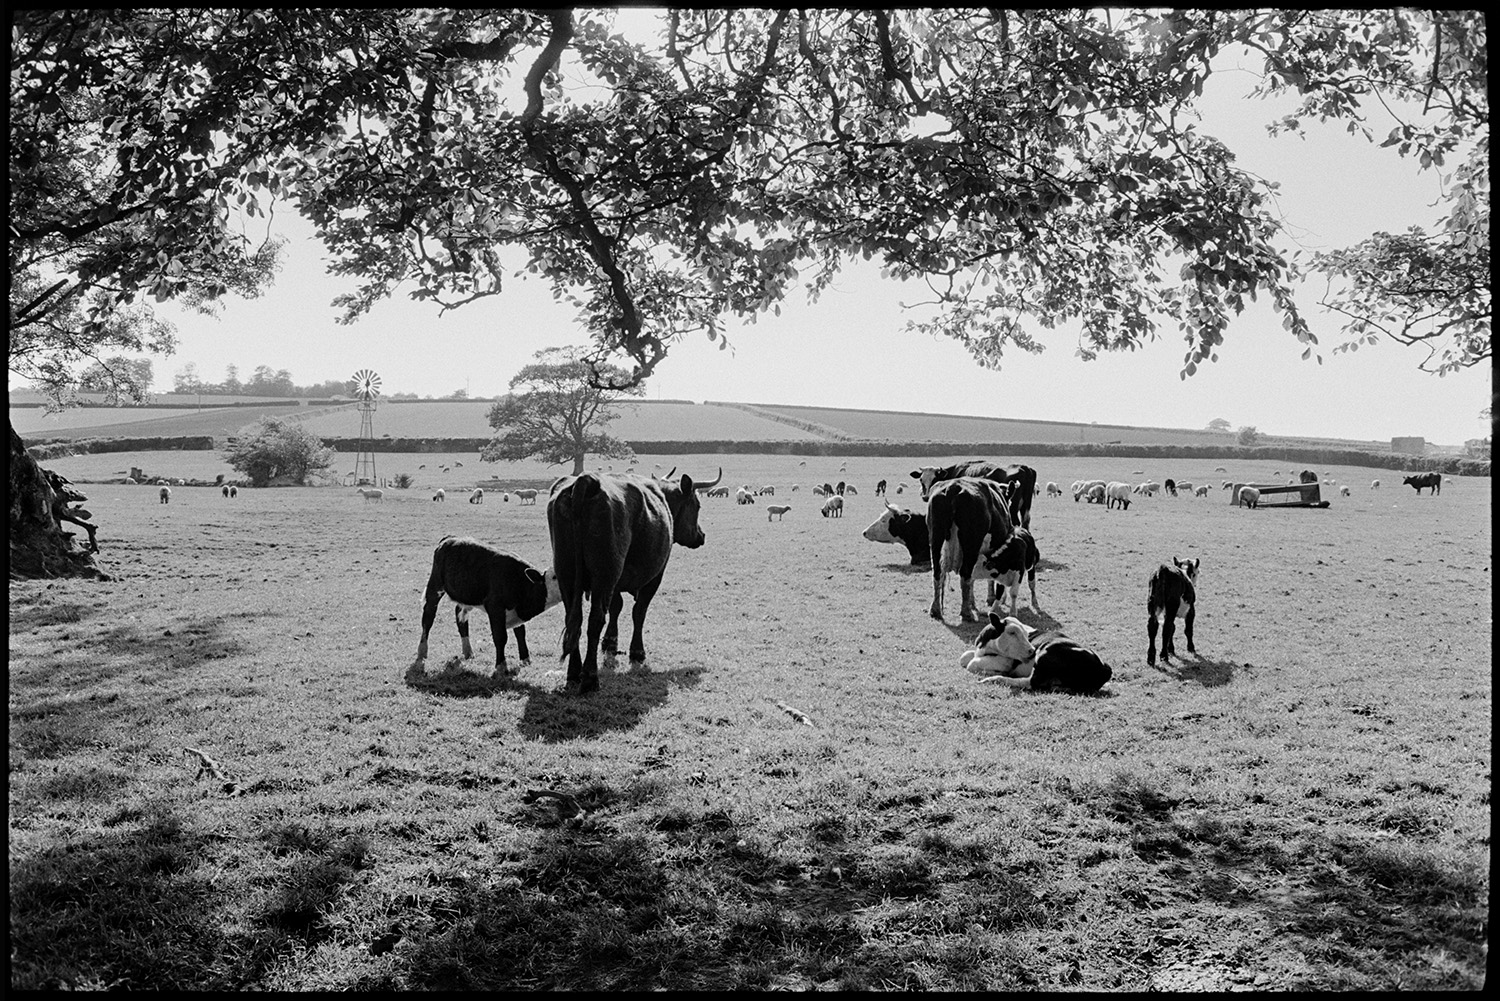 Reedcombing, men feeding wheat sheaves into machine from rick,
[Cows with suckling calves in a field at Westacott, Riddlecombe where there are also sheep grazing. In the background a small windmill mounted on metal supports, trees and hedgerows can be seen.]